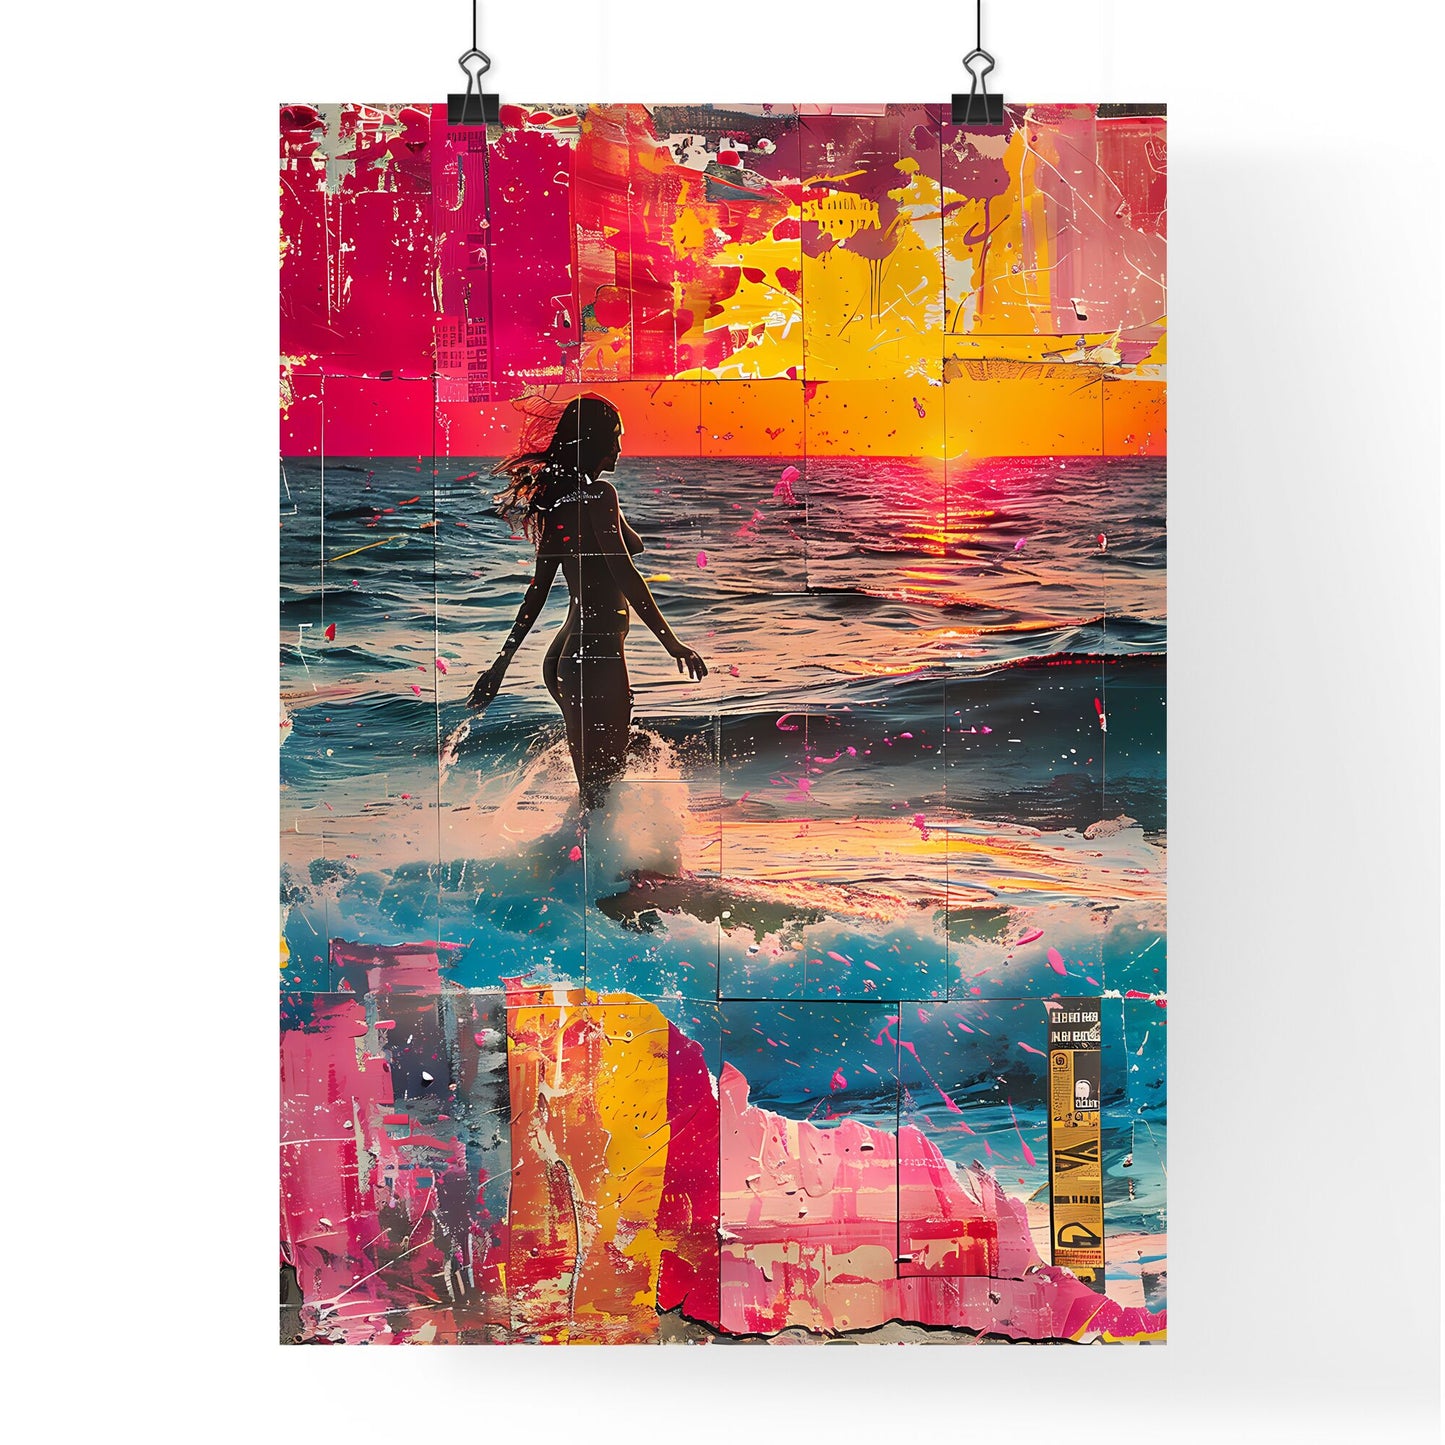 Vibrant Pop Art Surfing Venus: Screen Printed Trash Poster Style Painting with Spray Paint Default Title